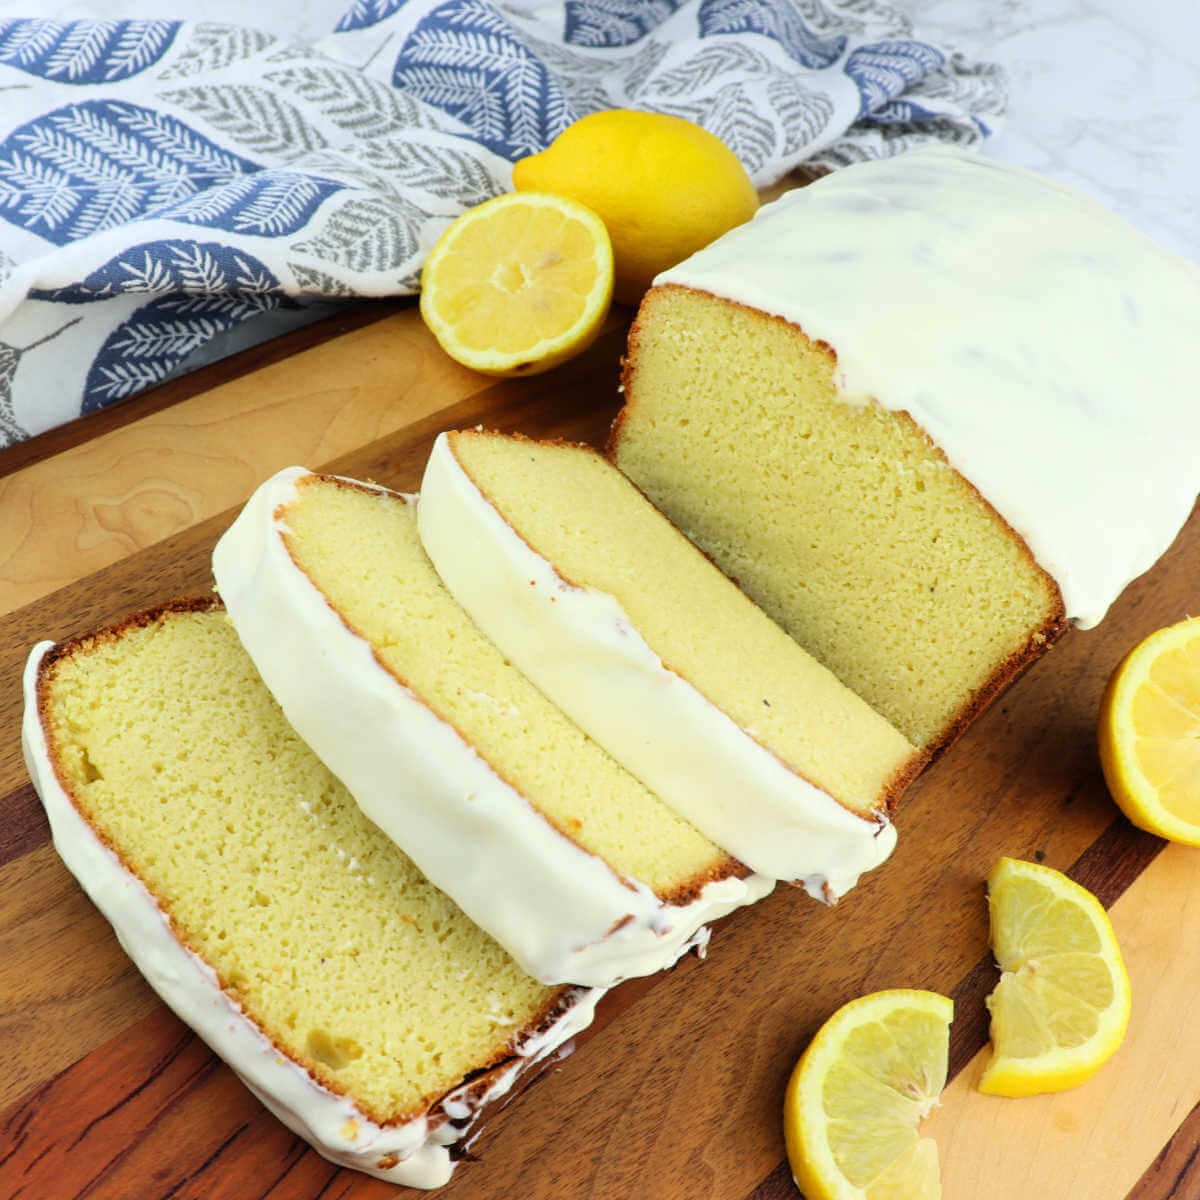 This tangy and delicious Keto lemon pound cake recipe is sugar-free, gluten-free, and 9 grams of protein a slice! Enjoy for a low carb breakfast or dessert. #ketodessert #ketobreakfast